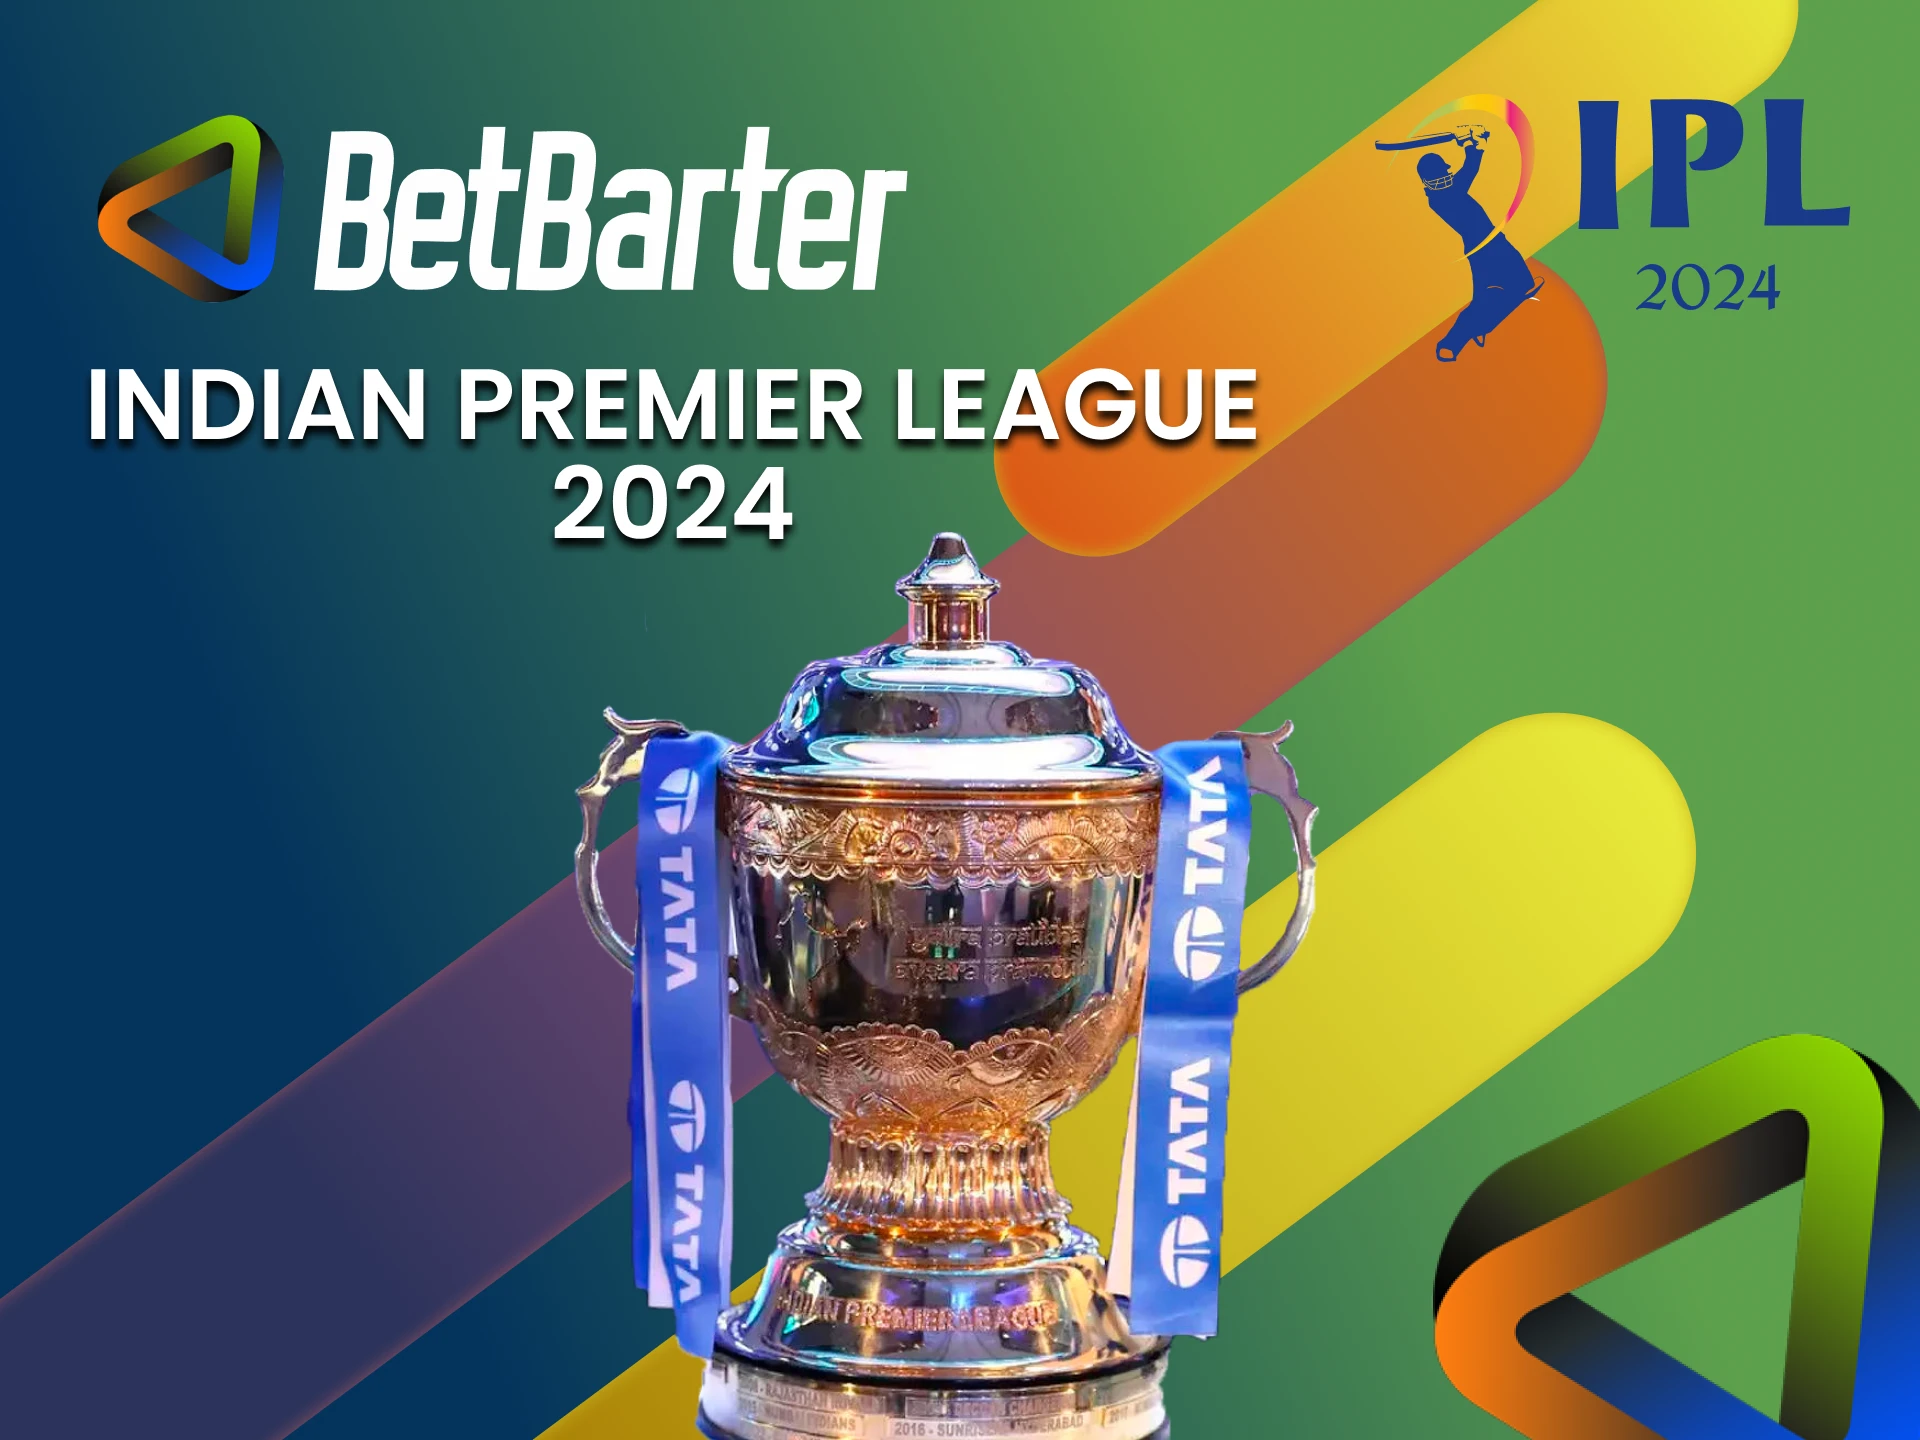 We will tell you about the IPL league on BetBarter.